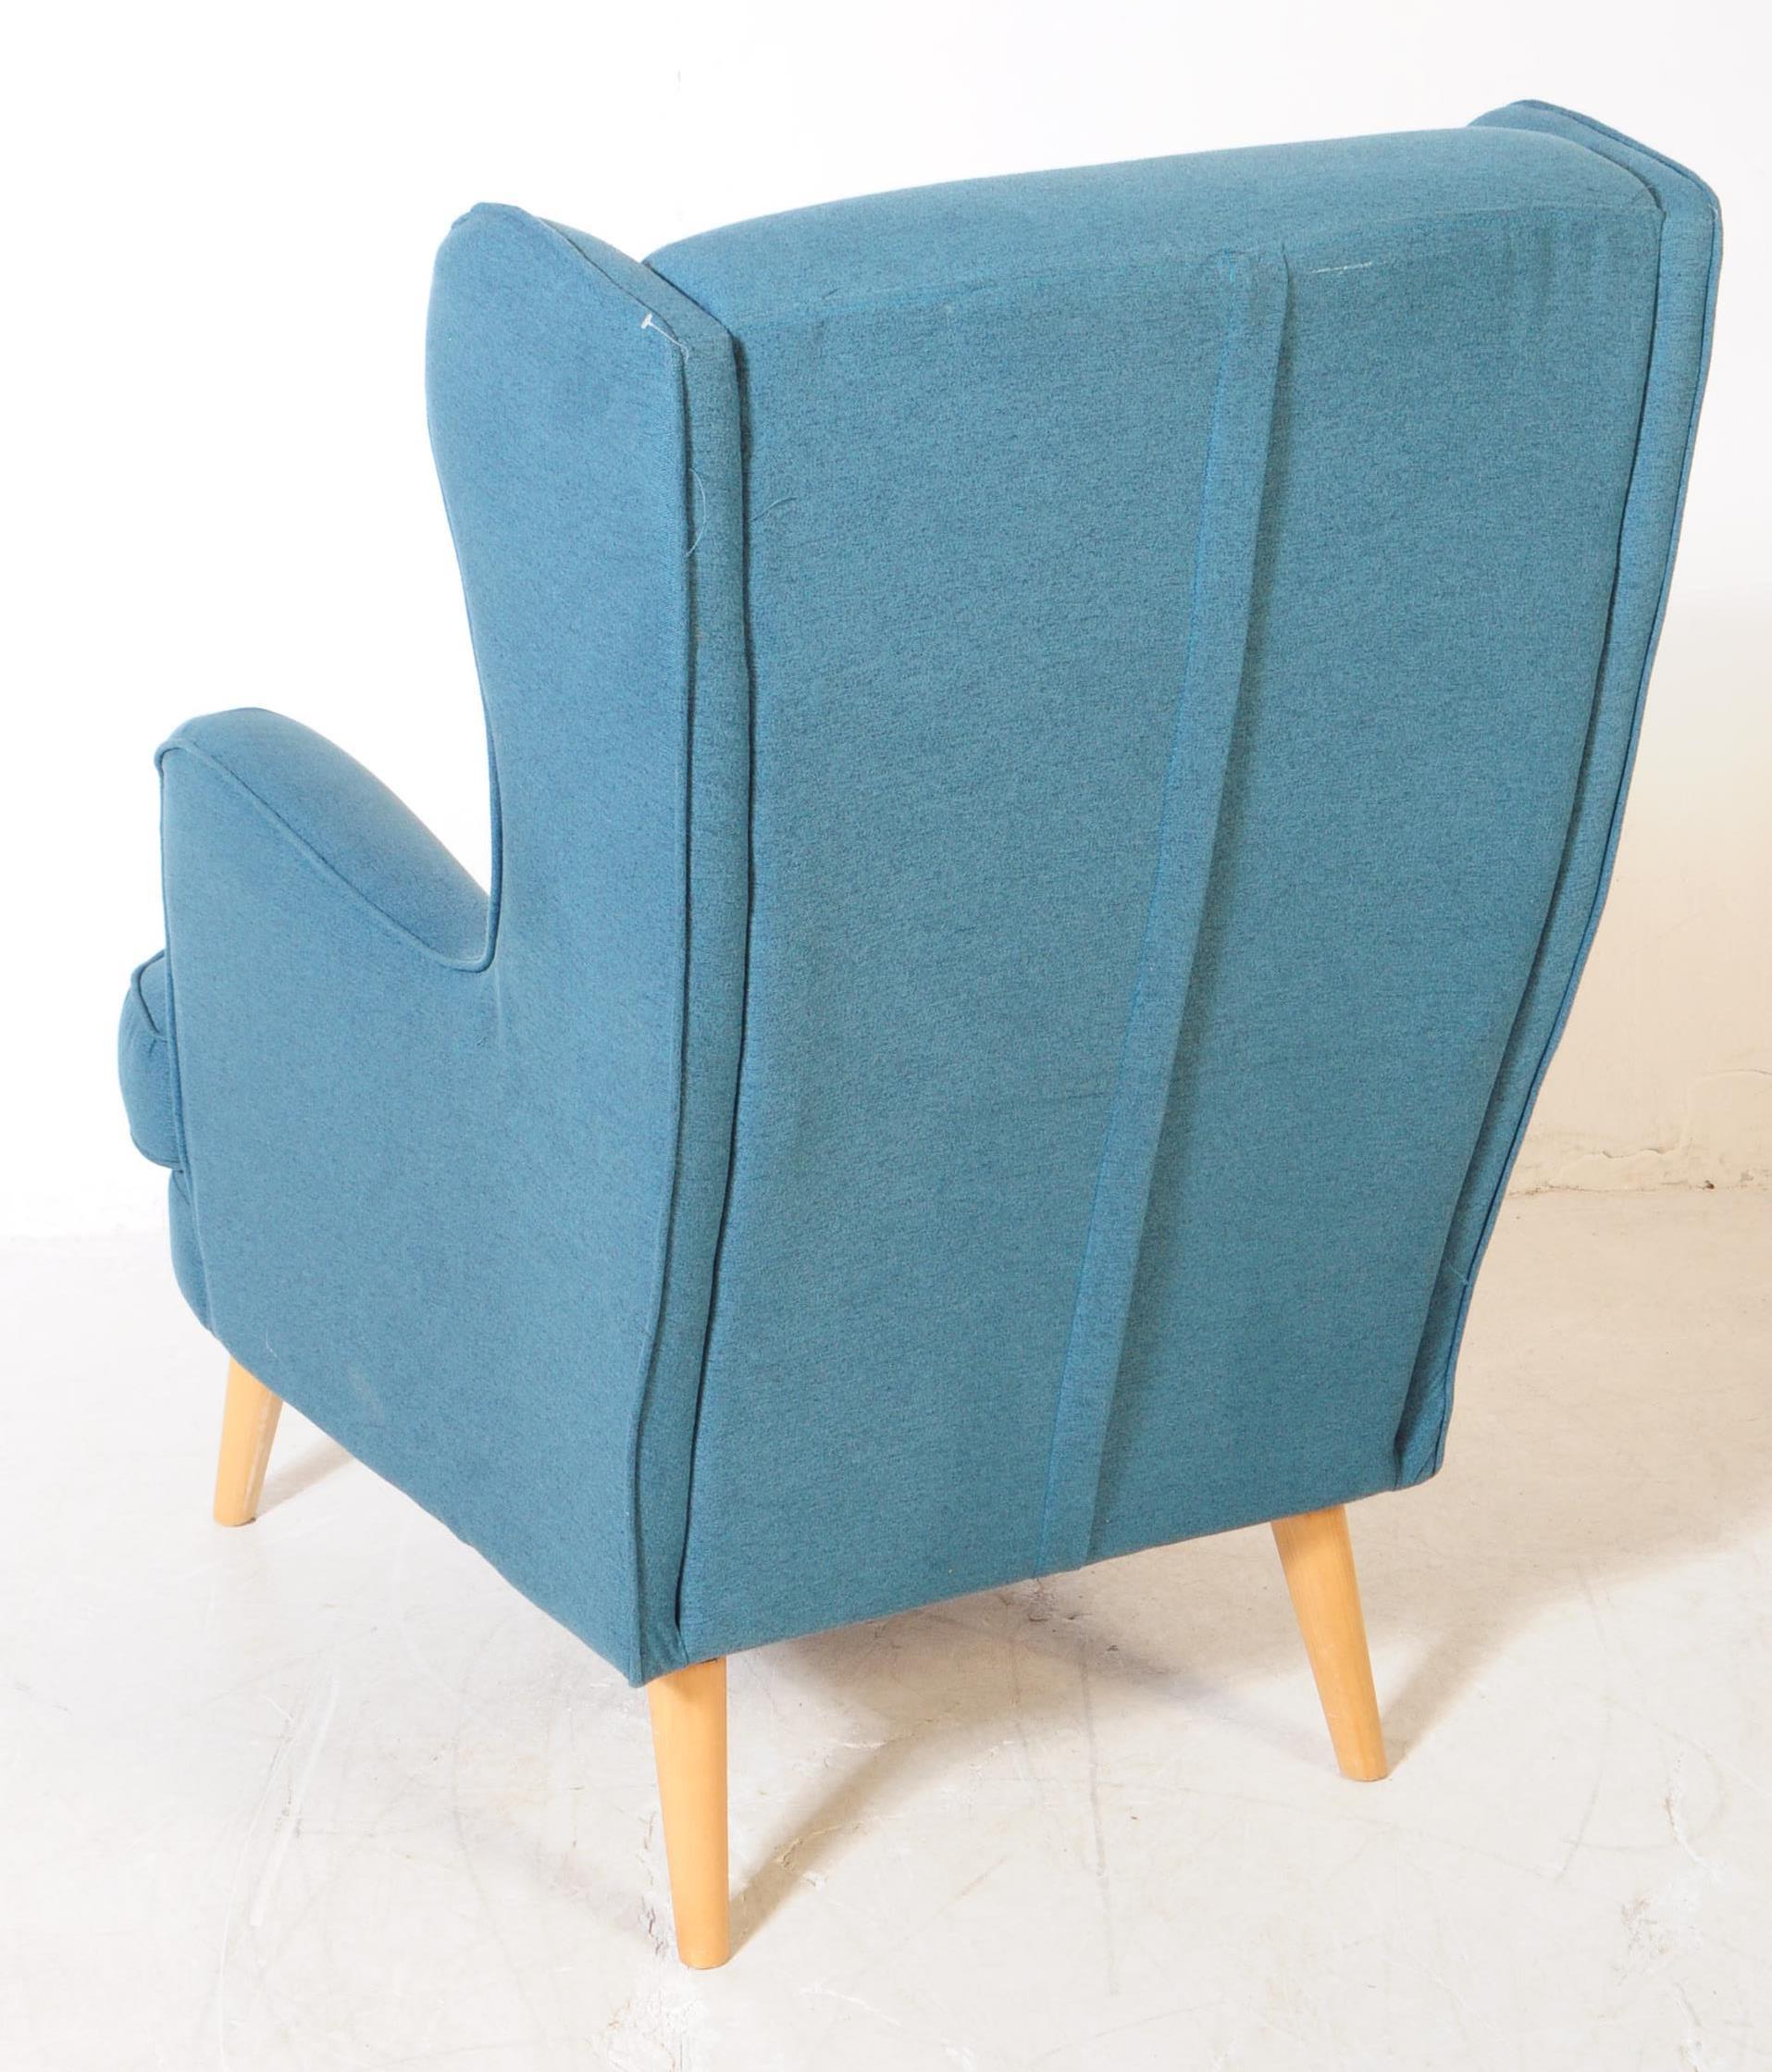 BRITISH MODERN DESIGN - CONTEMPORARY WINGBACK ARMCHAIR - Image 4 of 4